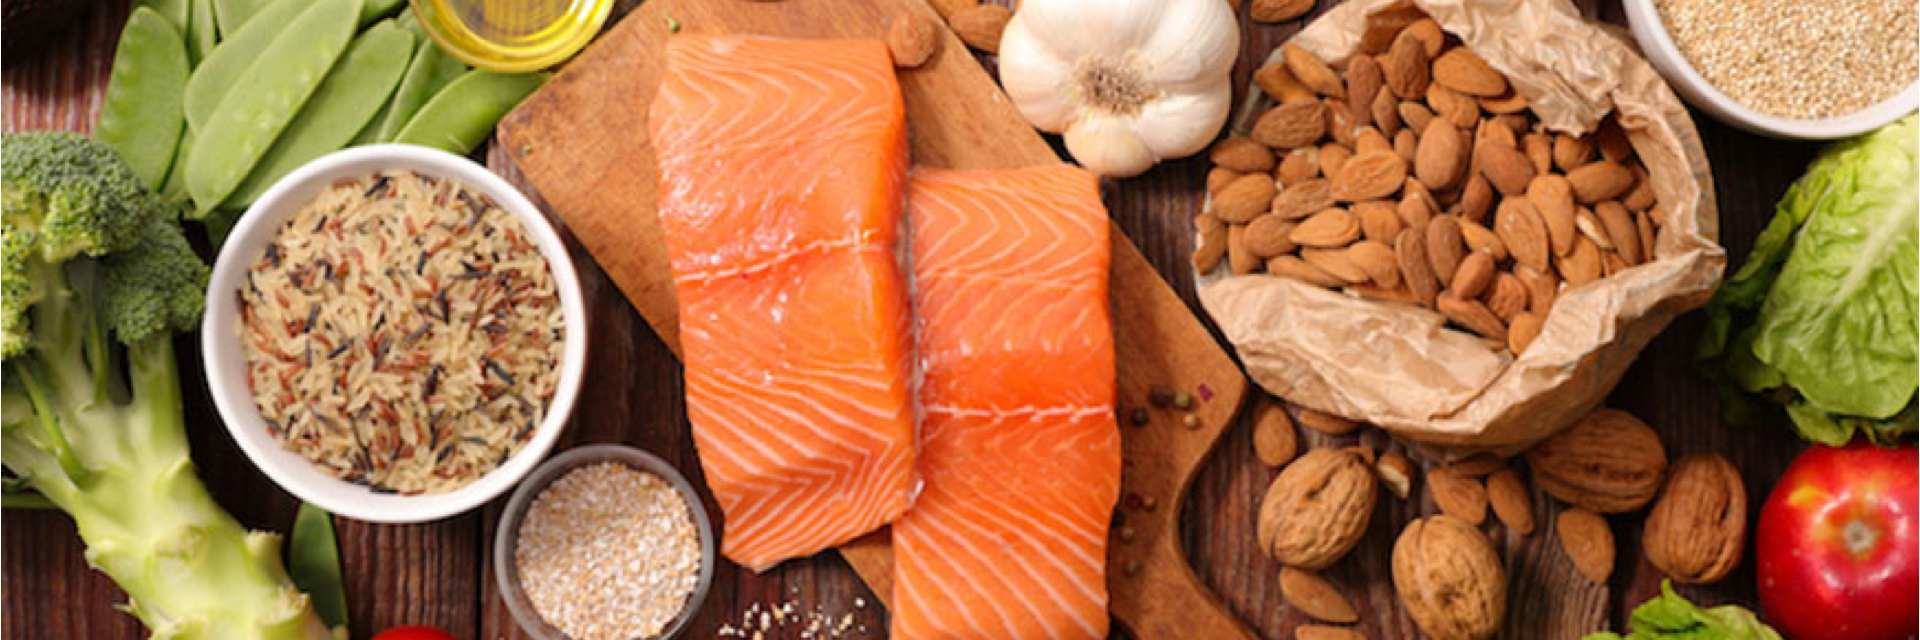 omega 3 foods to try